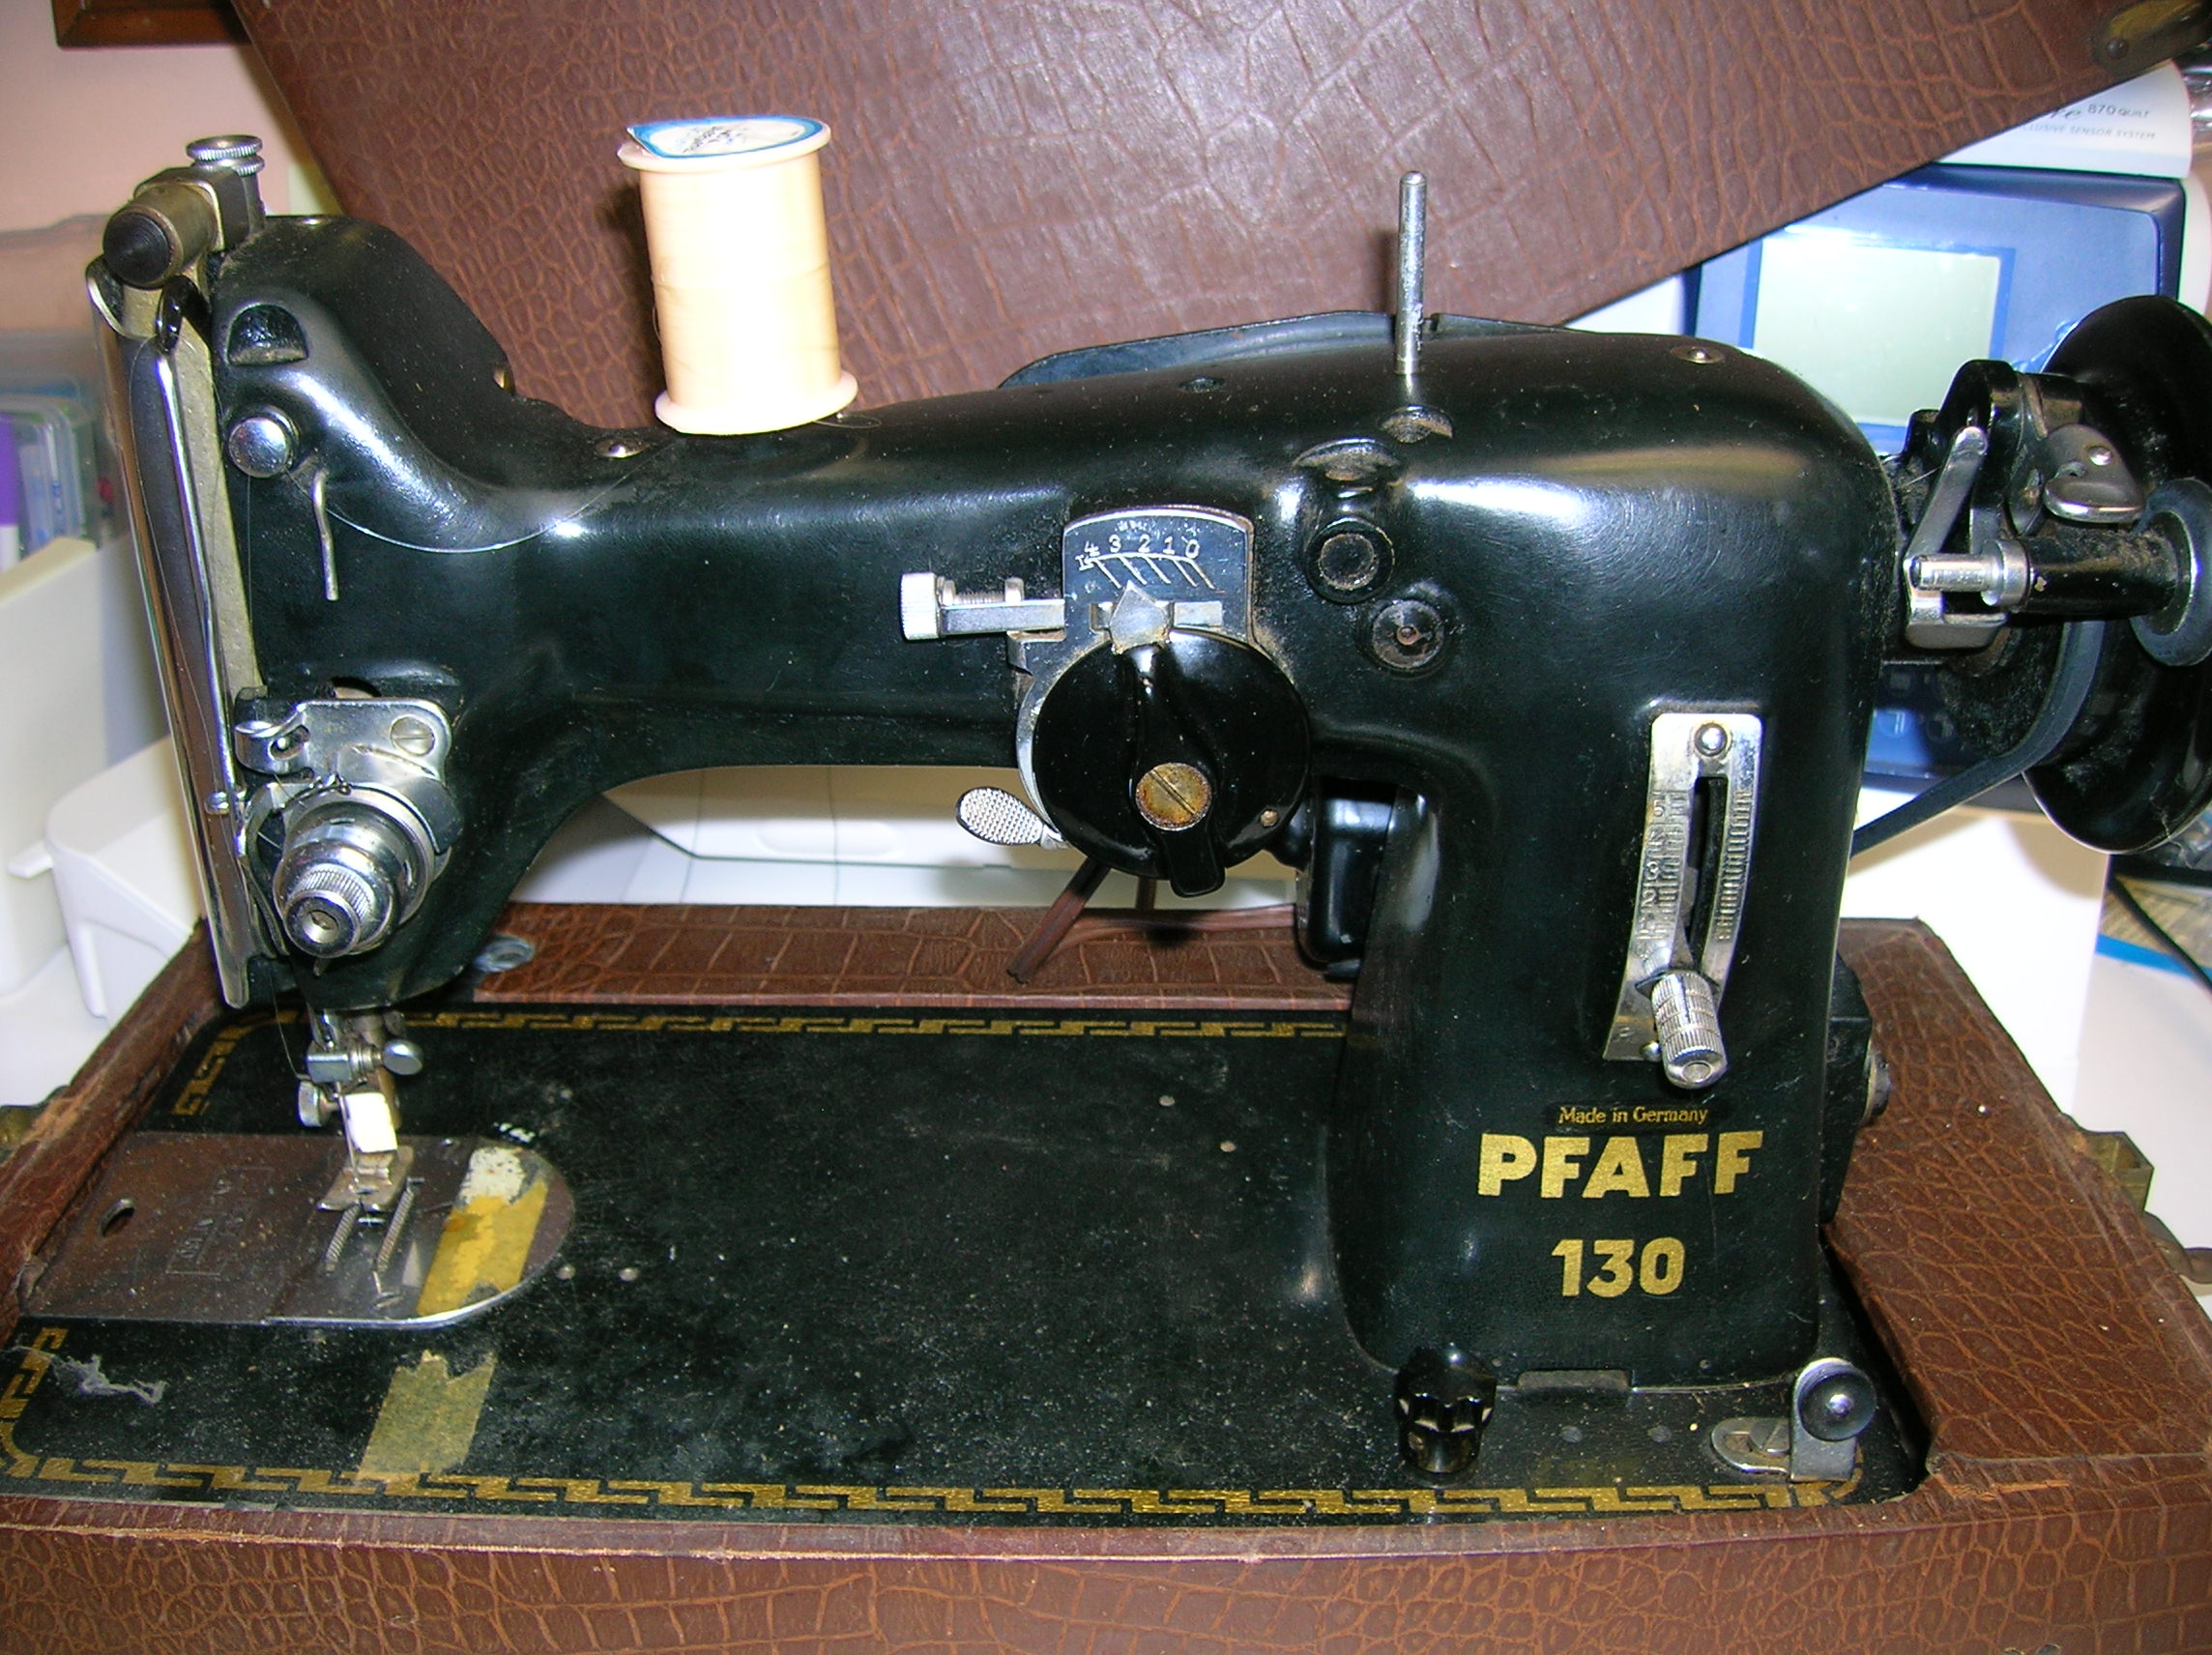 My second find of the weekend a Pfaff 130...